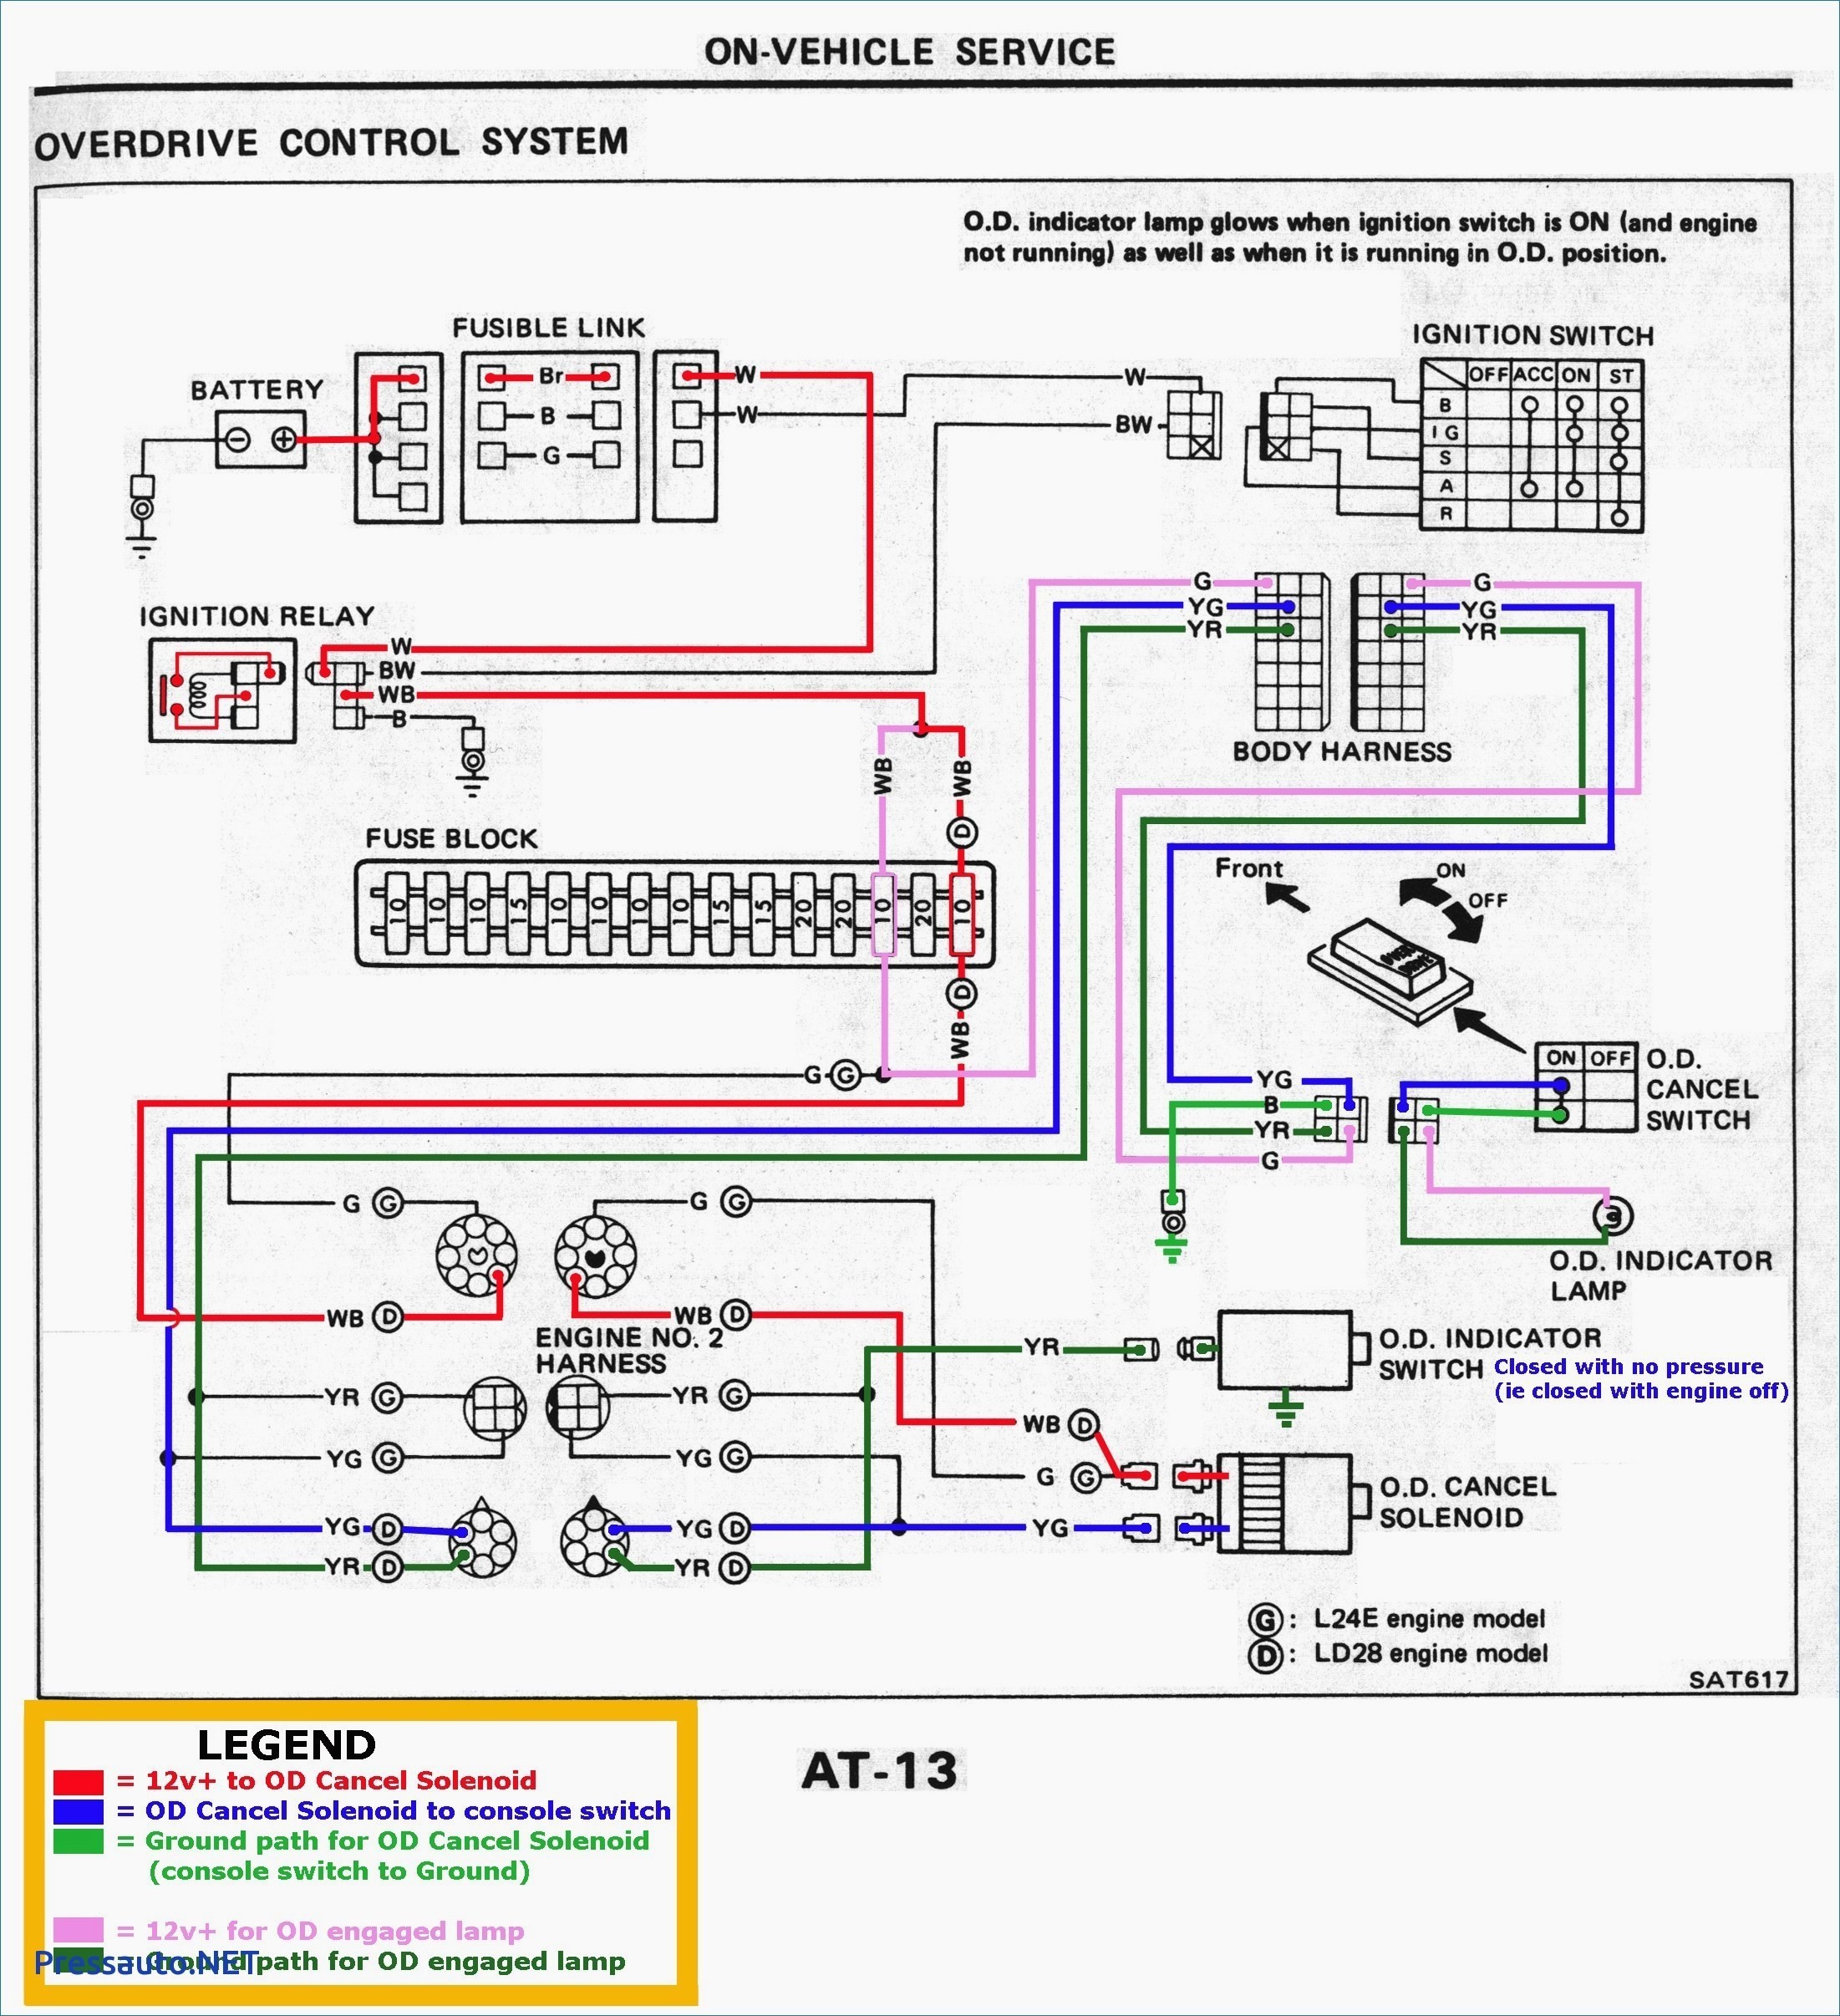 Wiring Diagram for Murray Ignition Switch New Lawn Mower Ignition Switch Wiring Diagram